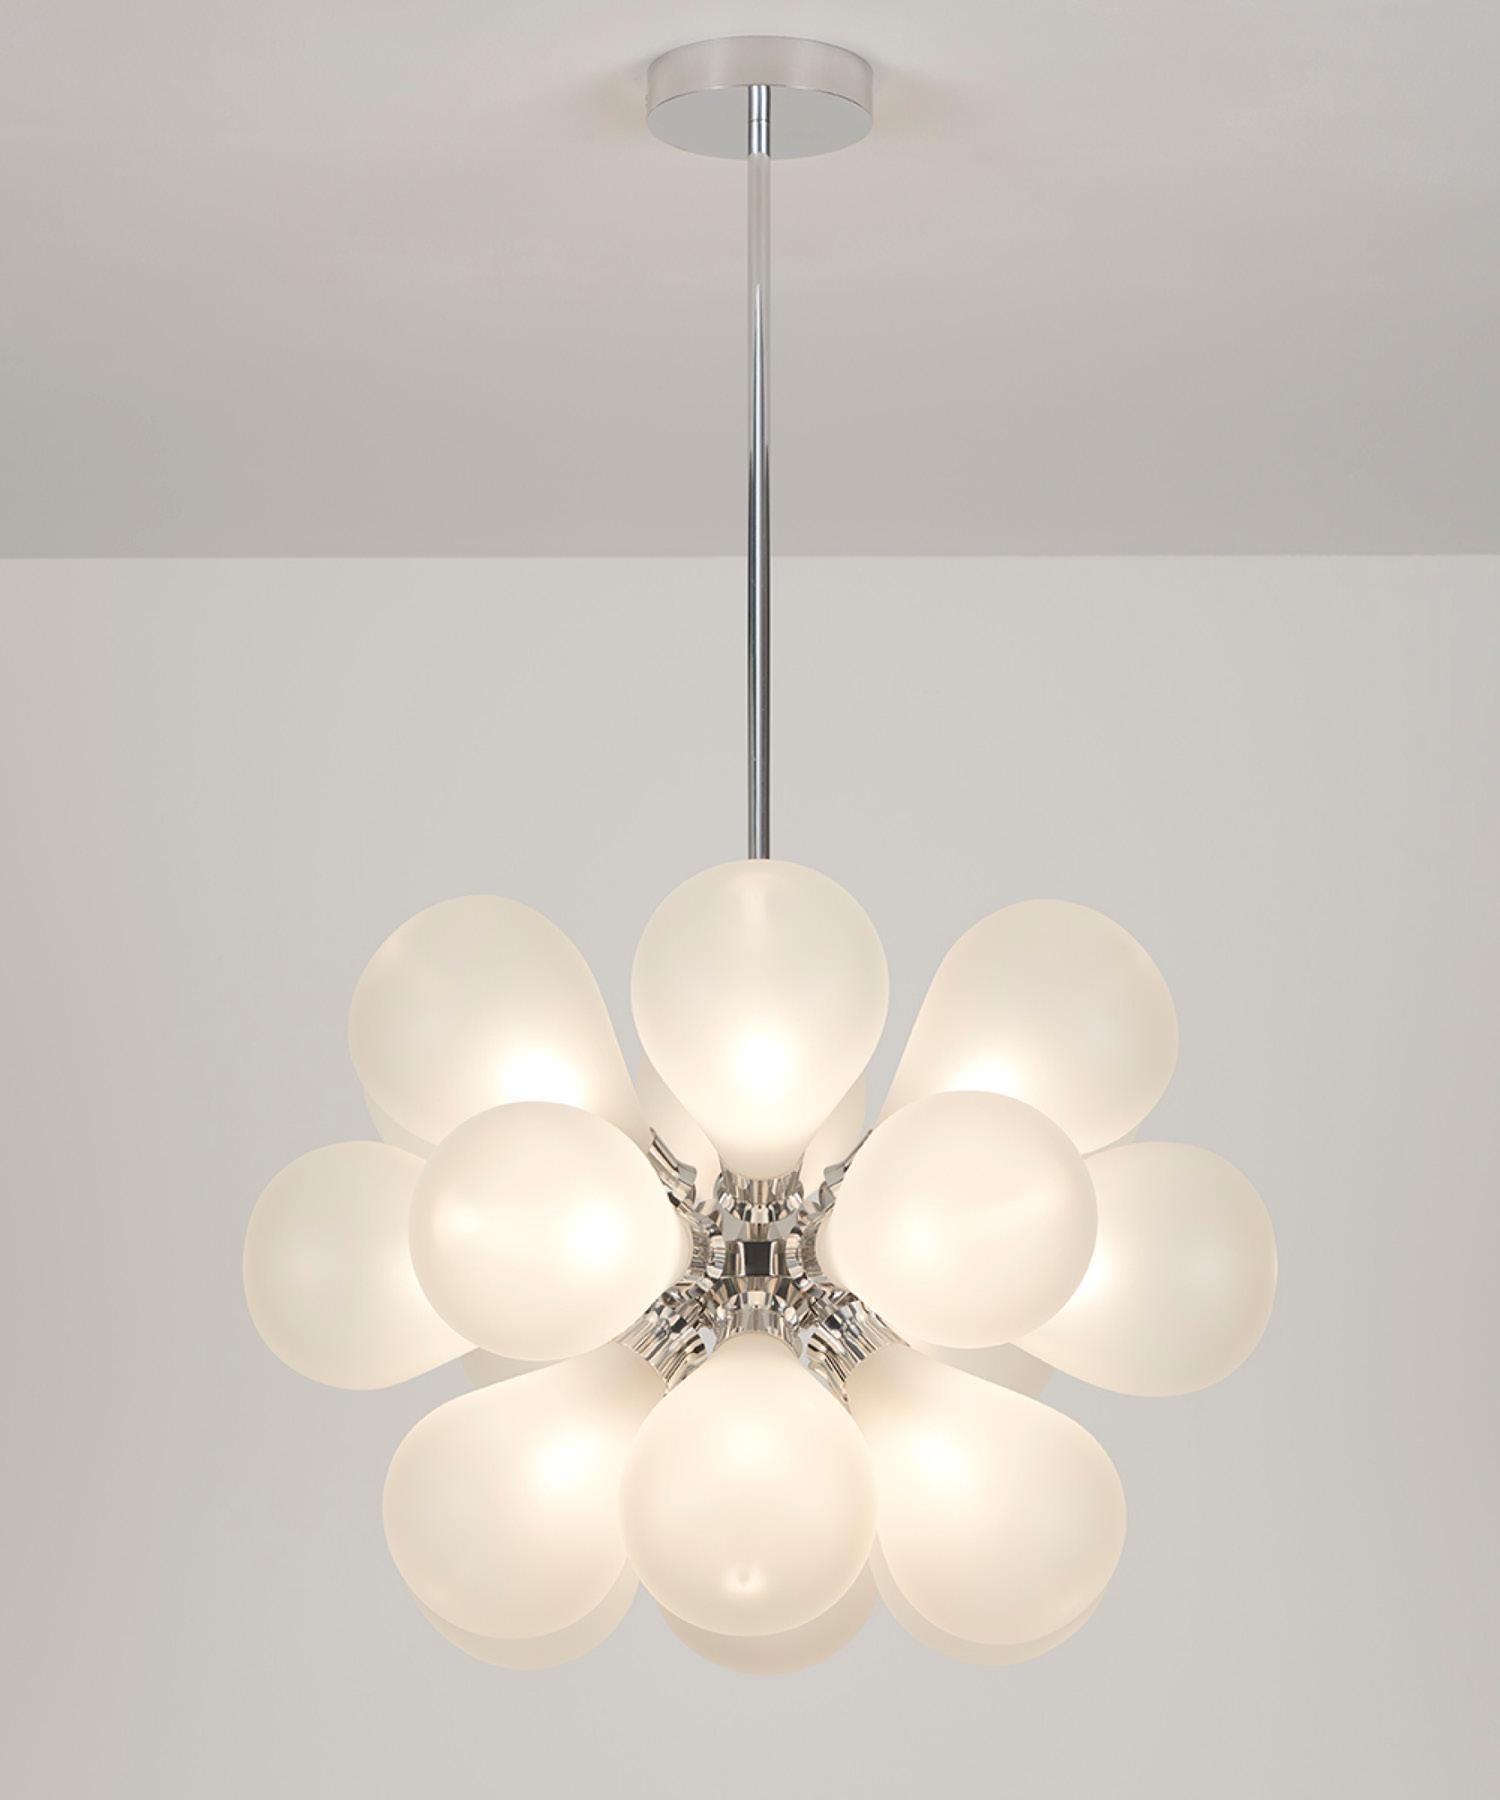 British Cintola Maxi Pendant in Polished Aluminium with 18 Handblown Frosted Globes For Sale